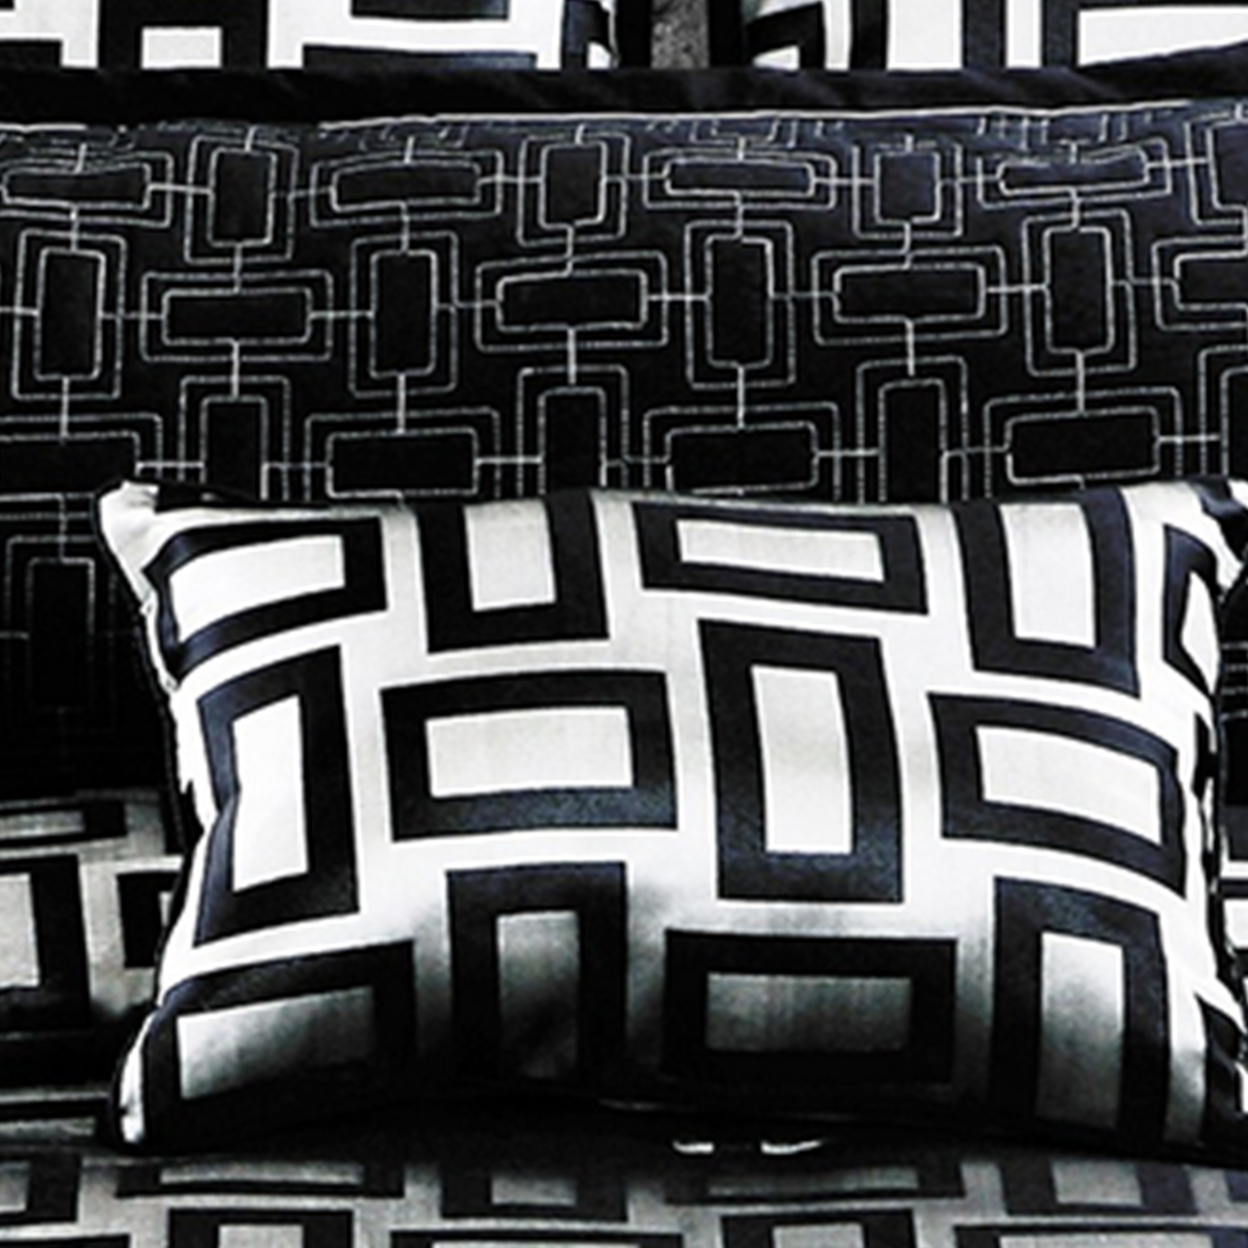 6 Piece Polyester Queen Comforter Set With Geometric Print, Gray And Black- Saltoro Sherpi